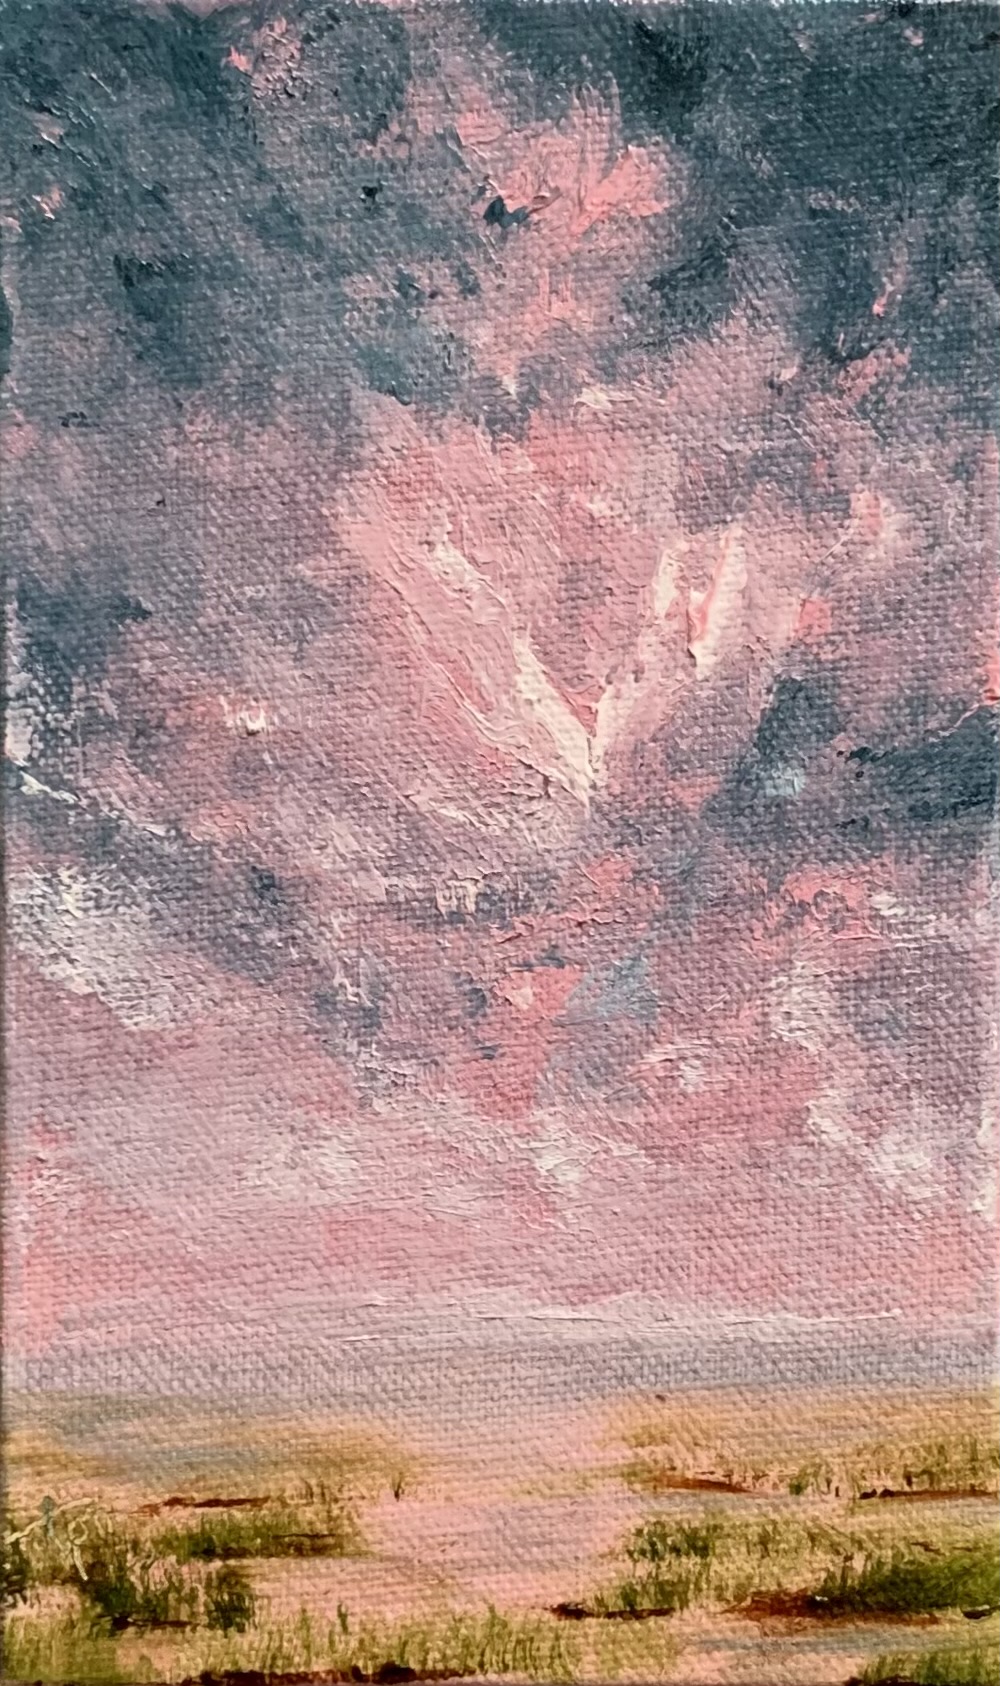 Original tiny oil painting by Tisha Mark, Week 36, 52 Weeks of Finding Light Series, 5"x3" oil on linen panel (2023). Painting of a pink cloudscape over a coastal marsh.